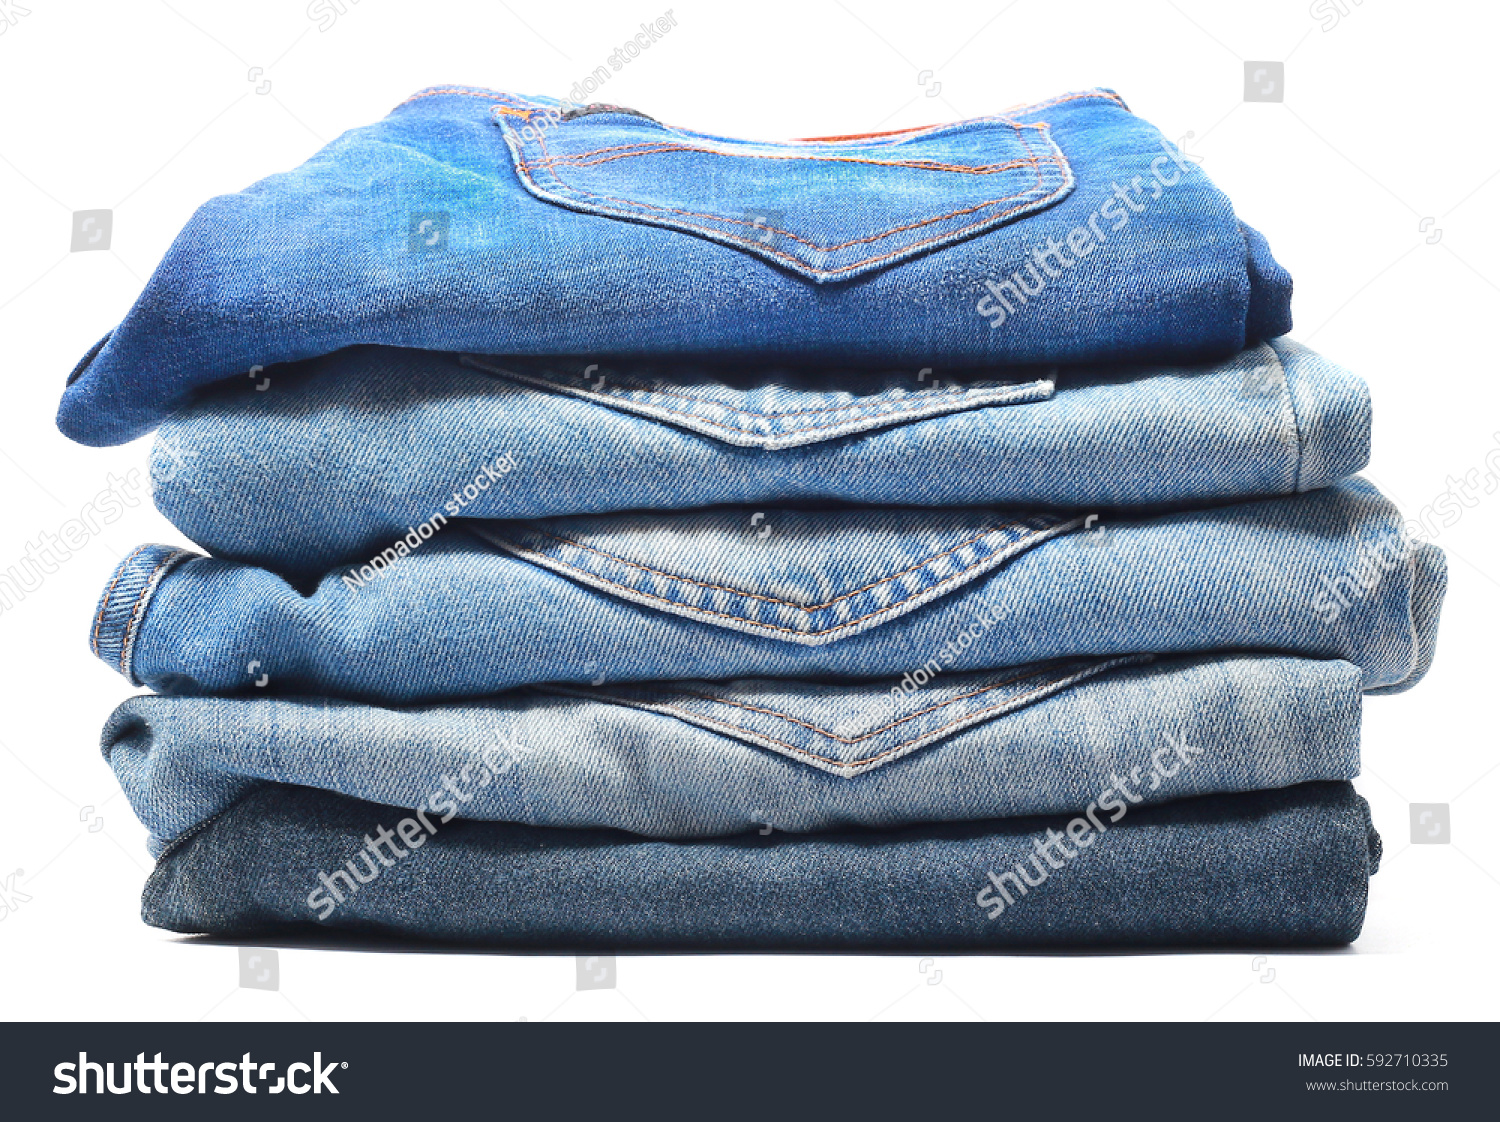 22,209 Stack of blue jeans Images, Stock Photos & Vectors | Shutterstock